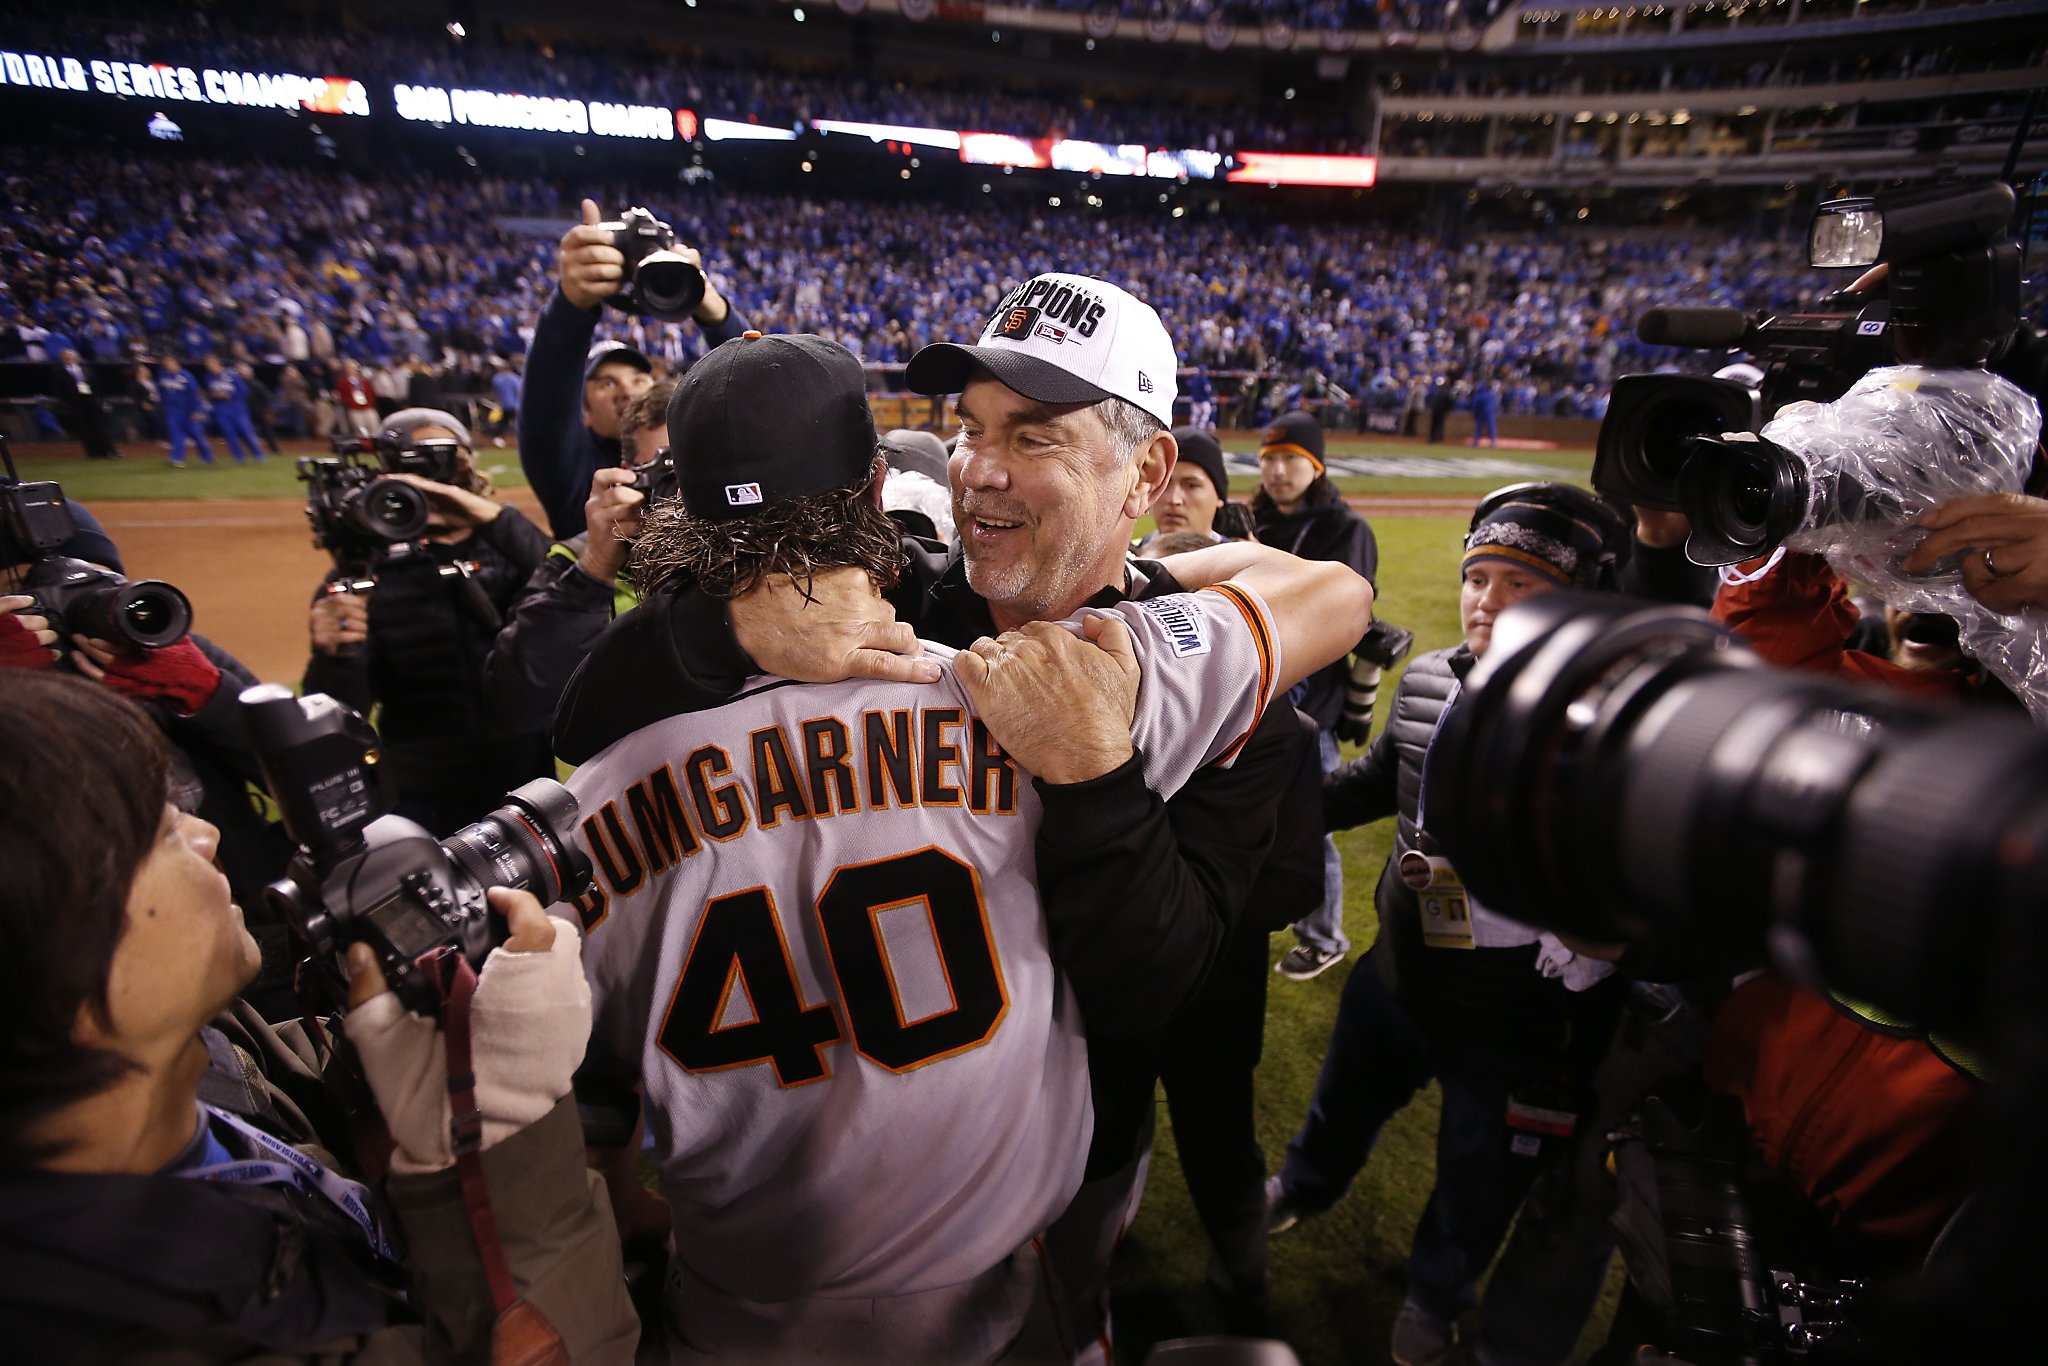 Giants beat Royals in Game 7 for 3rd title in 5 years